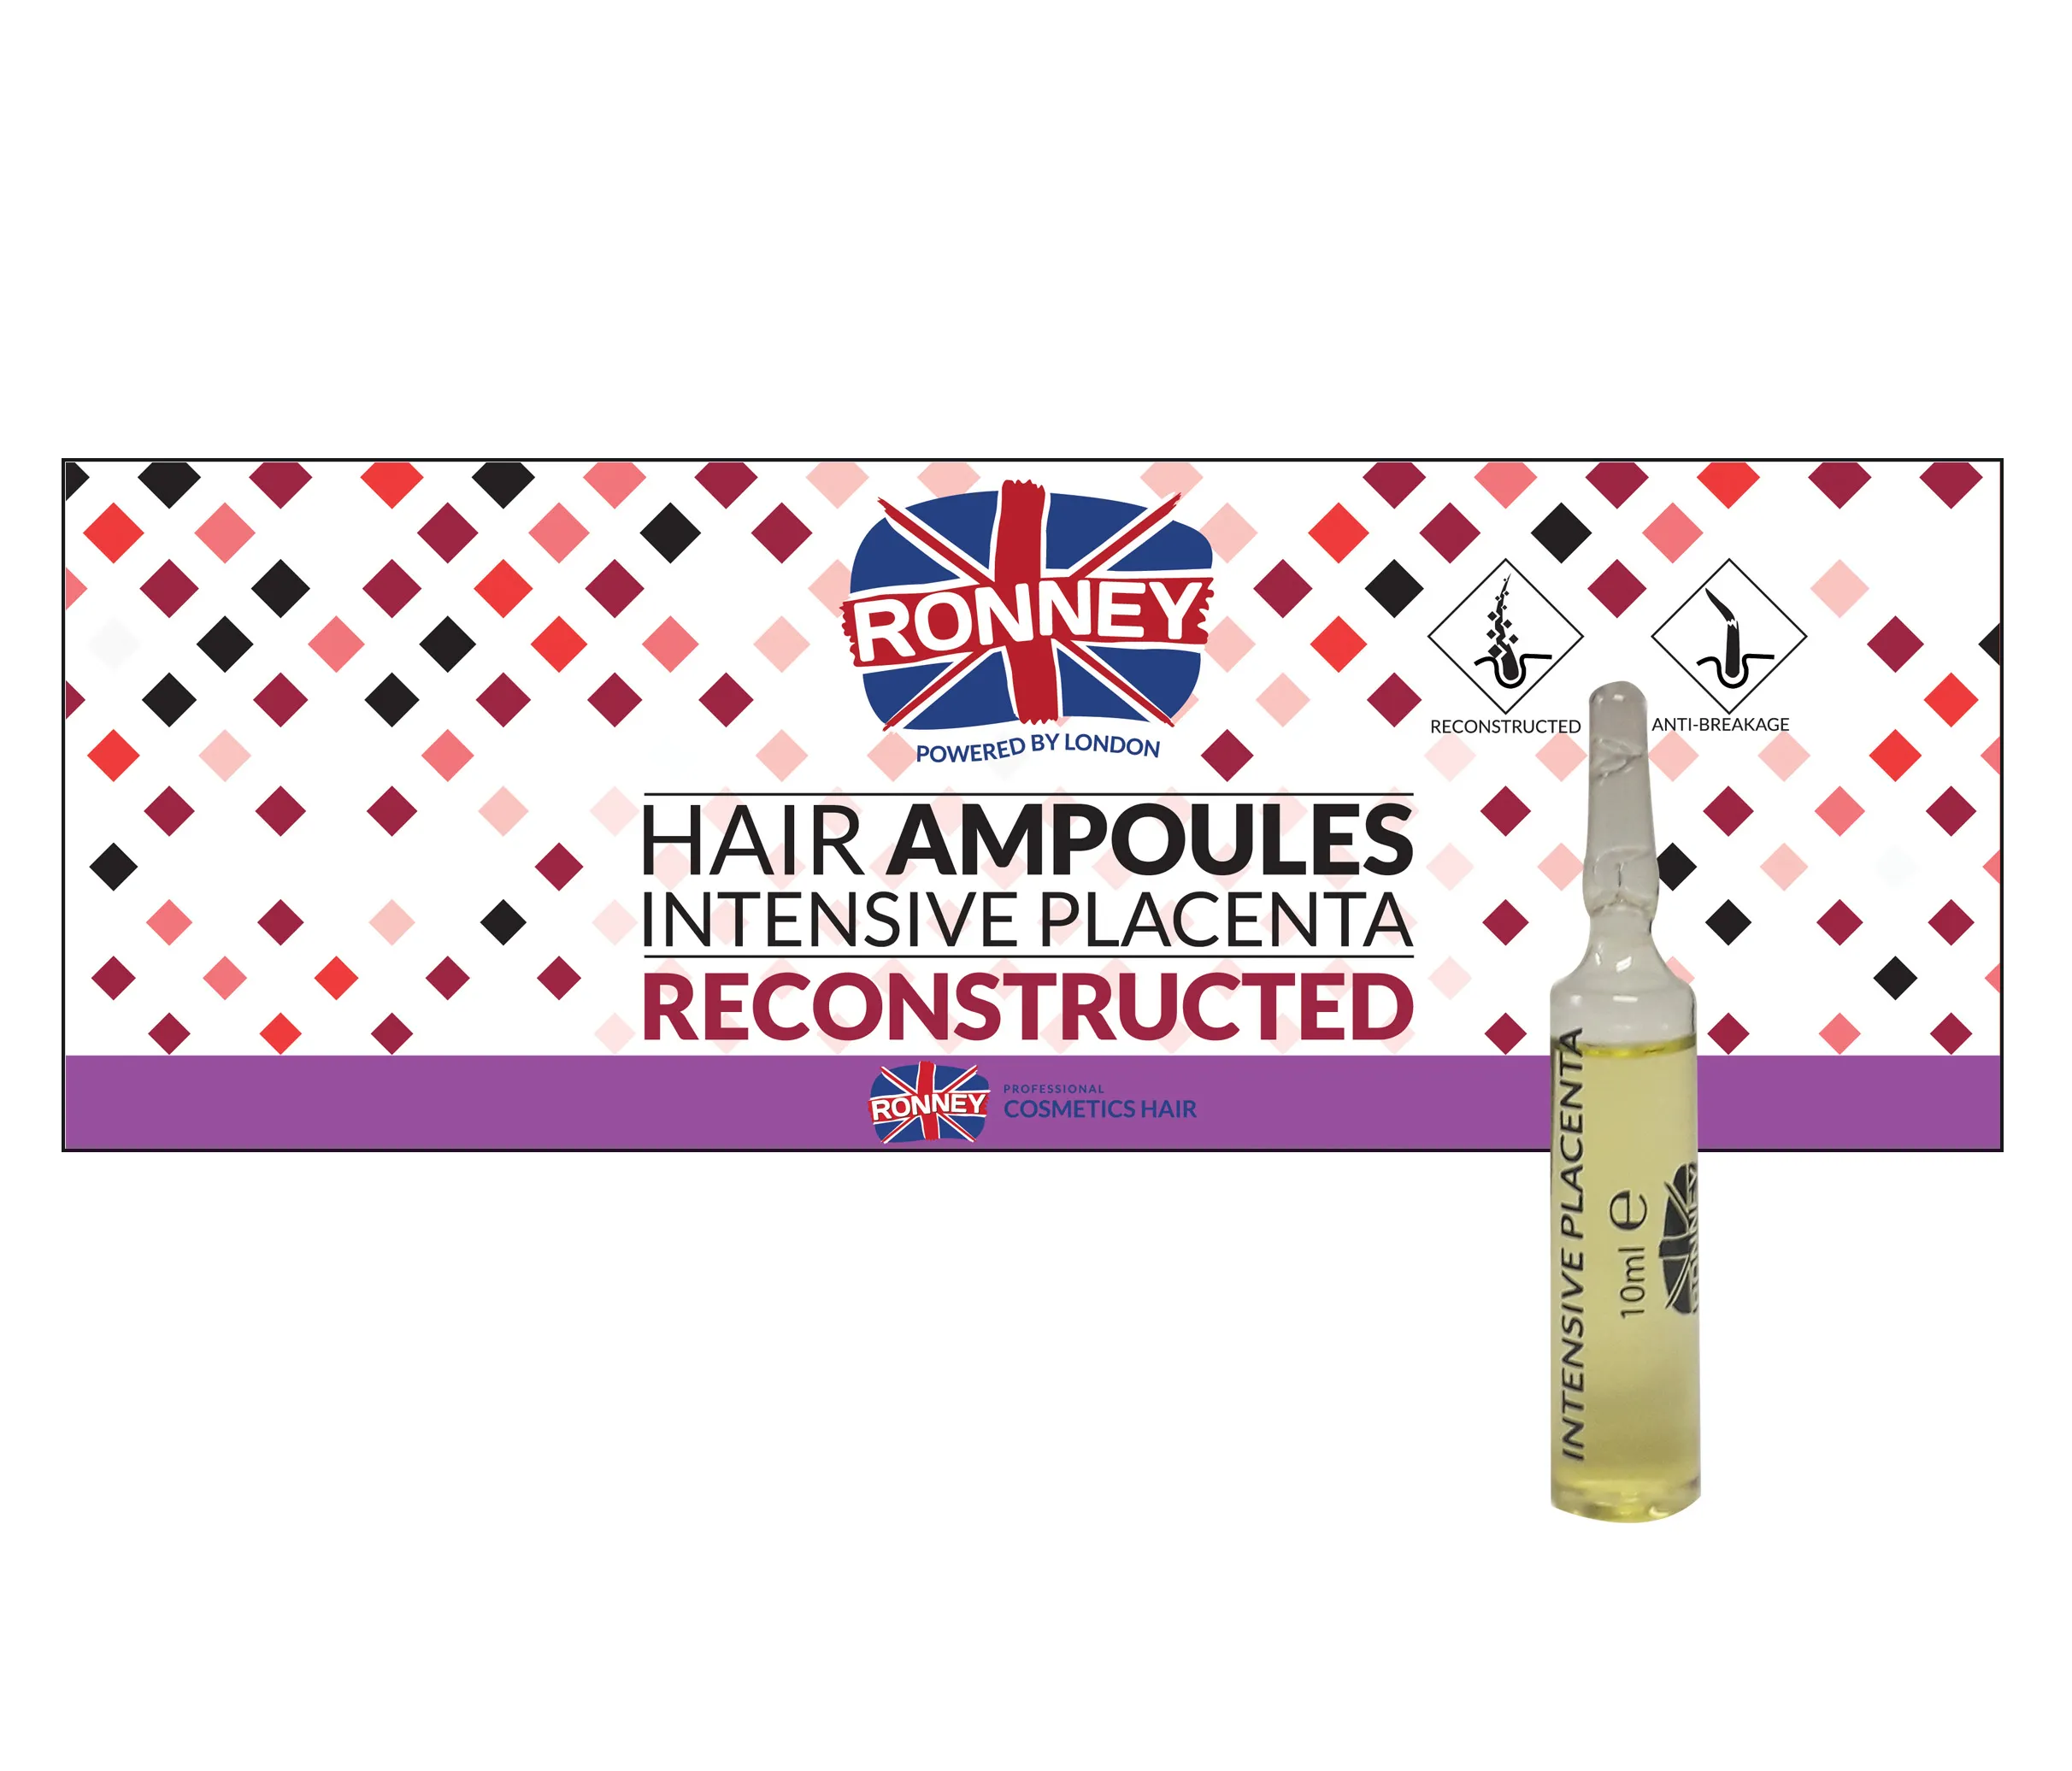 RONNEY Hair Ampoules Intensive Placenta Ampułki Reconstructed Placenta, 12 × 10 ml